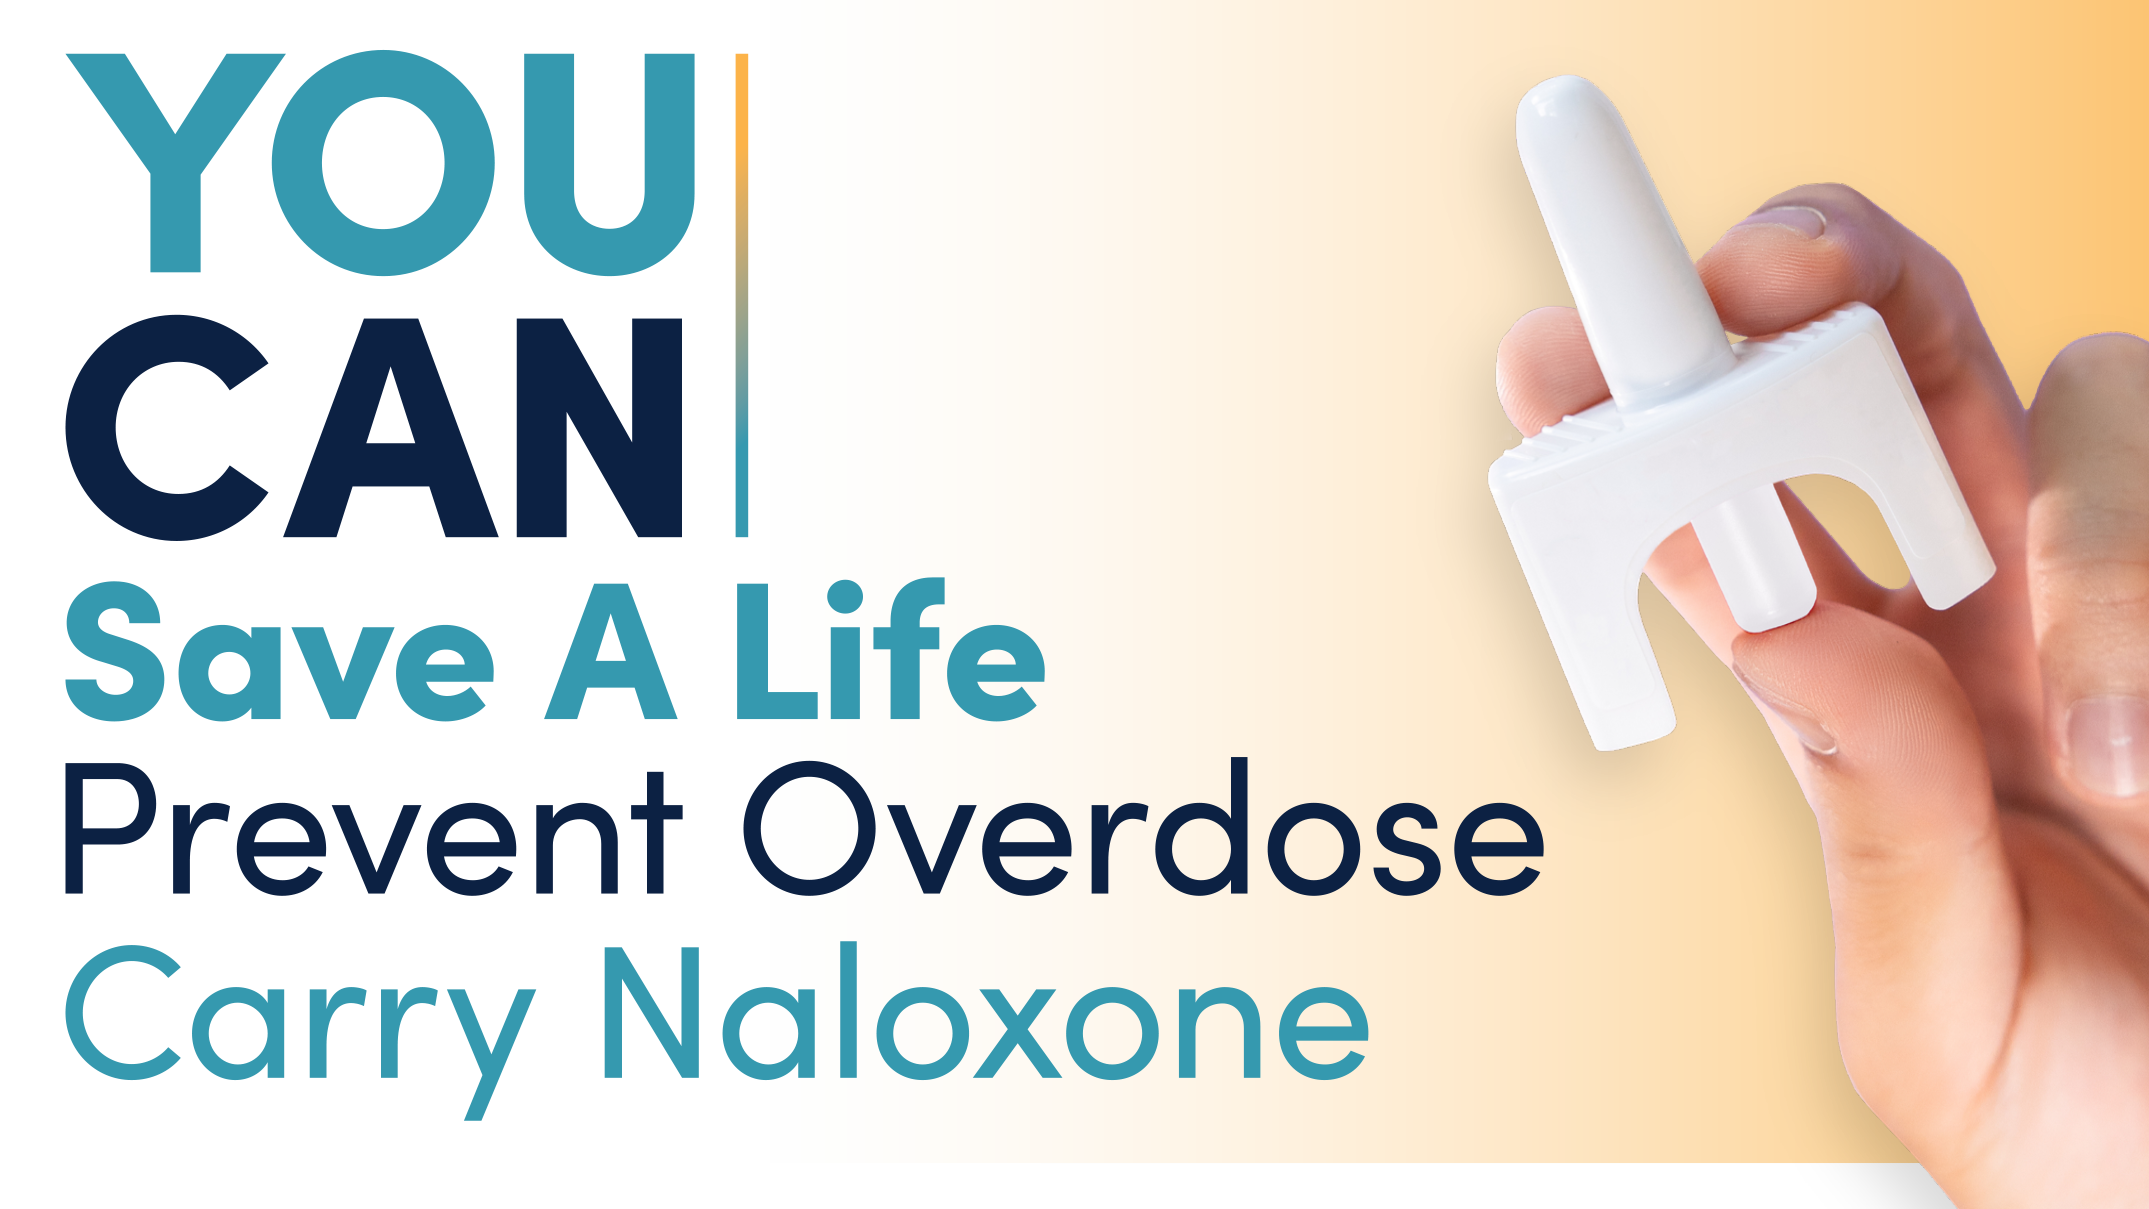 You can save a life. Prevent Overdose, Carry Naloxone.